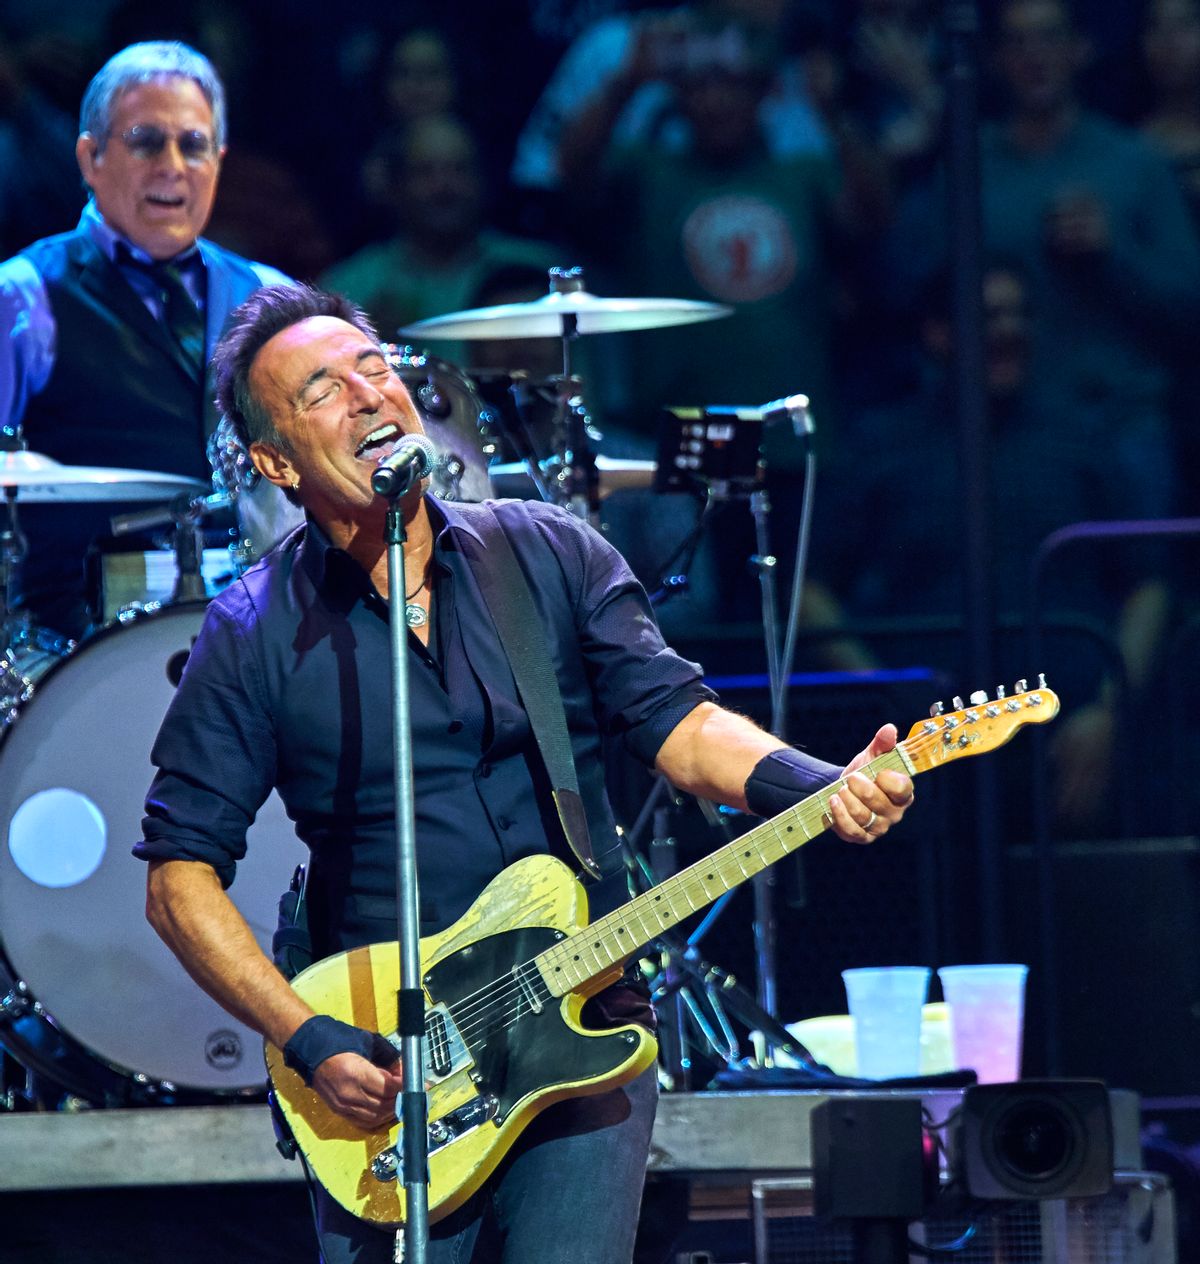 Bruce Springsteen and Max Weinberg, back, perform with the E Street Band at Madison Square Garden, Wednesday, Jan. 27, 2016, in New York.  (Photo by Robert Altman /Invision/AP) (Robert Altman/invision/ap)